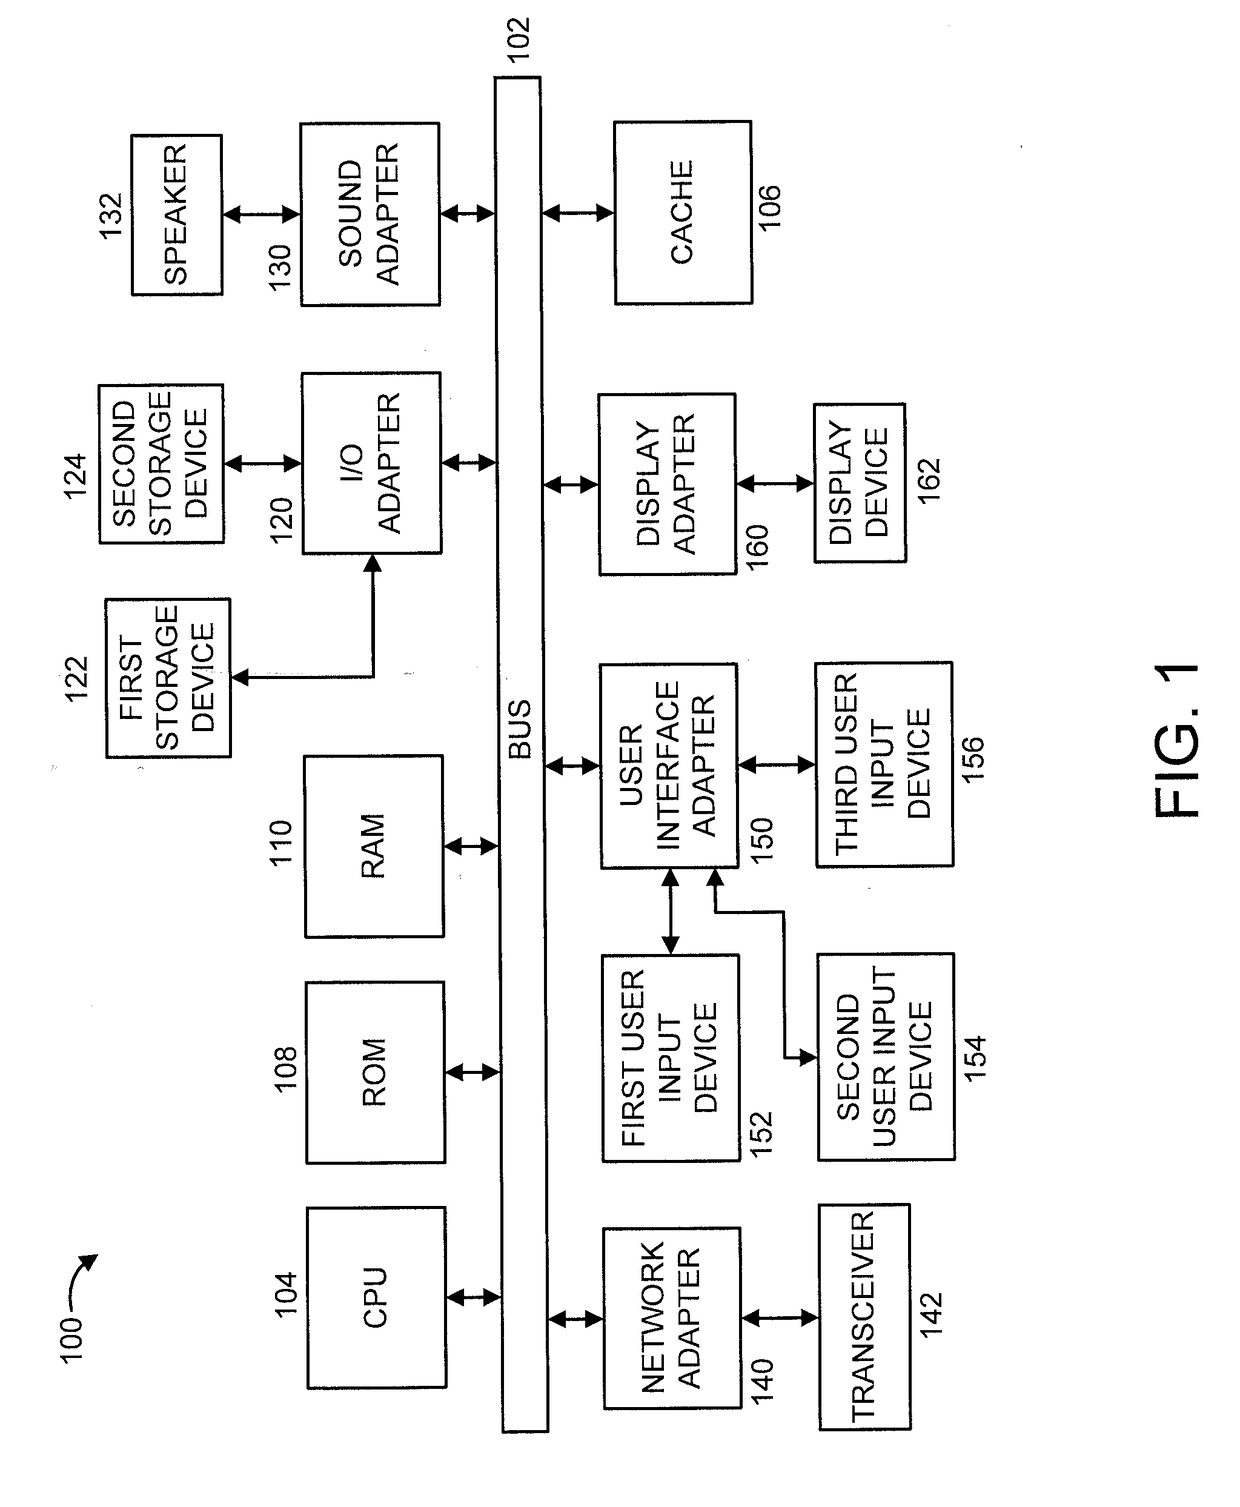 Mechanism for fault diagnosis and recovery of network service chains